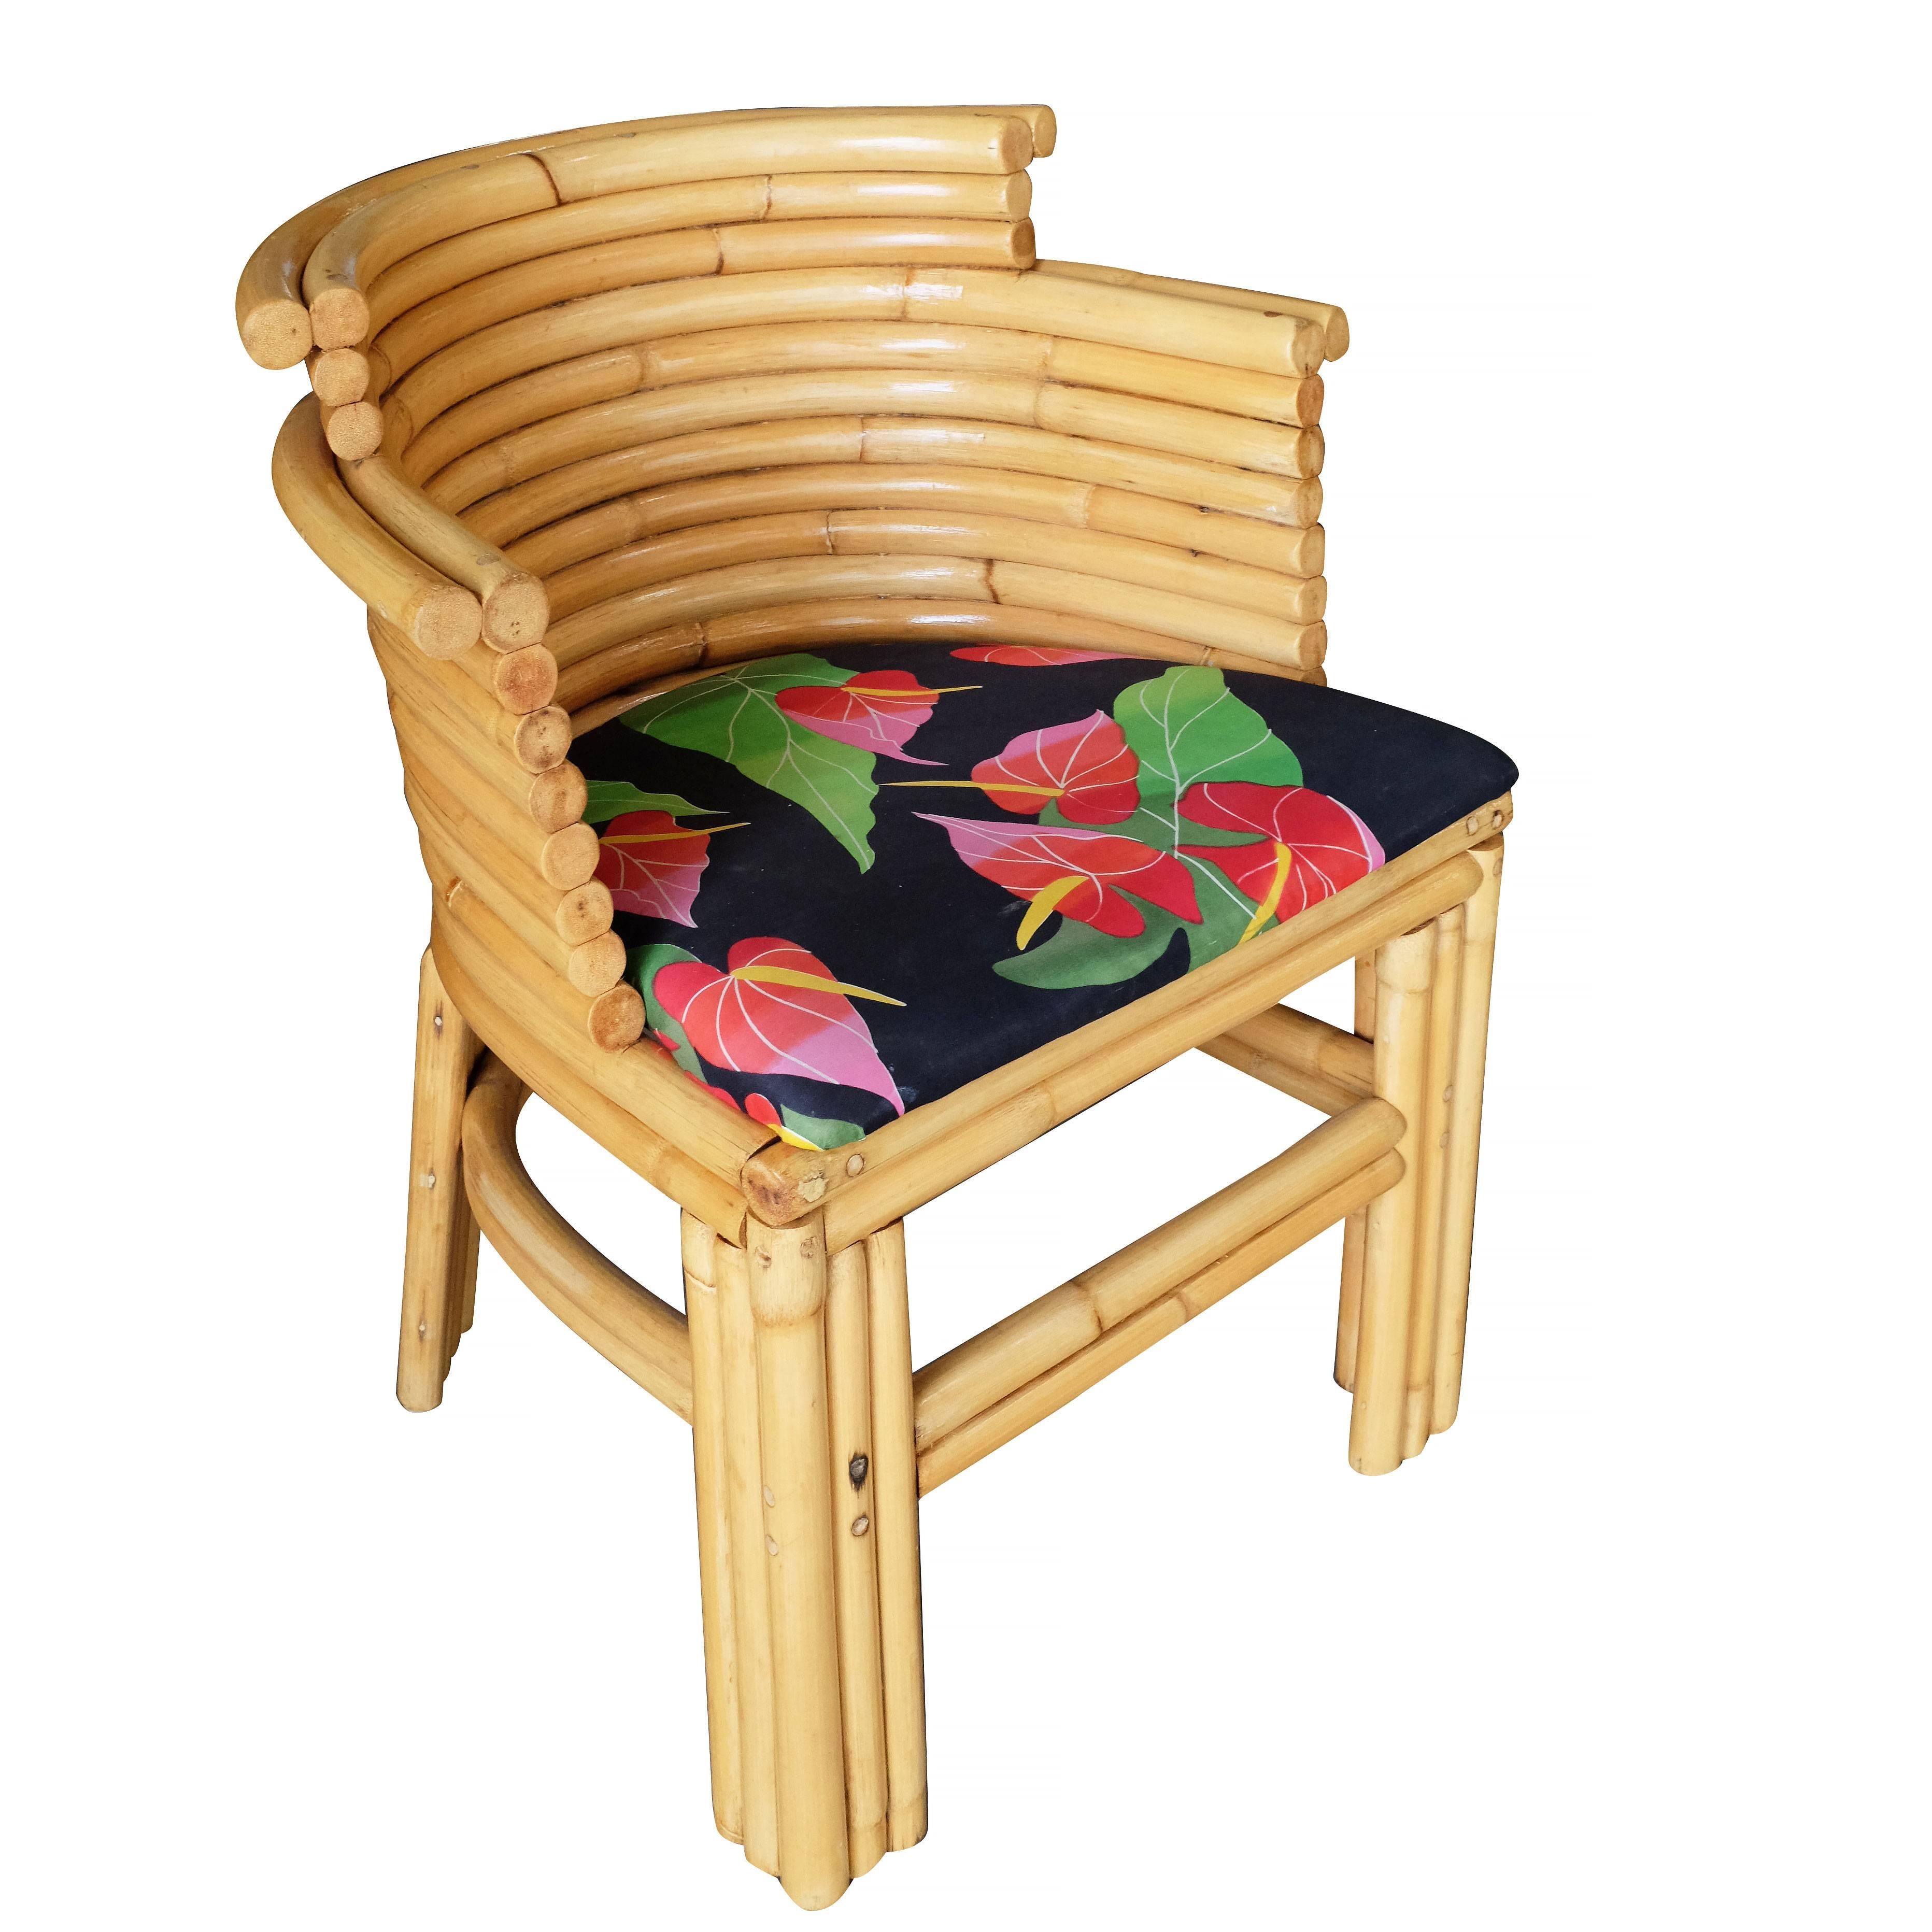 Set of four Paul Frankl streamline rattan dining room chair each chair featuring a stacked streamline back and 5 strand pole strand legs. 

Cushions made to order included. The cushions pictured are good vintage shape but can be replaced upon